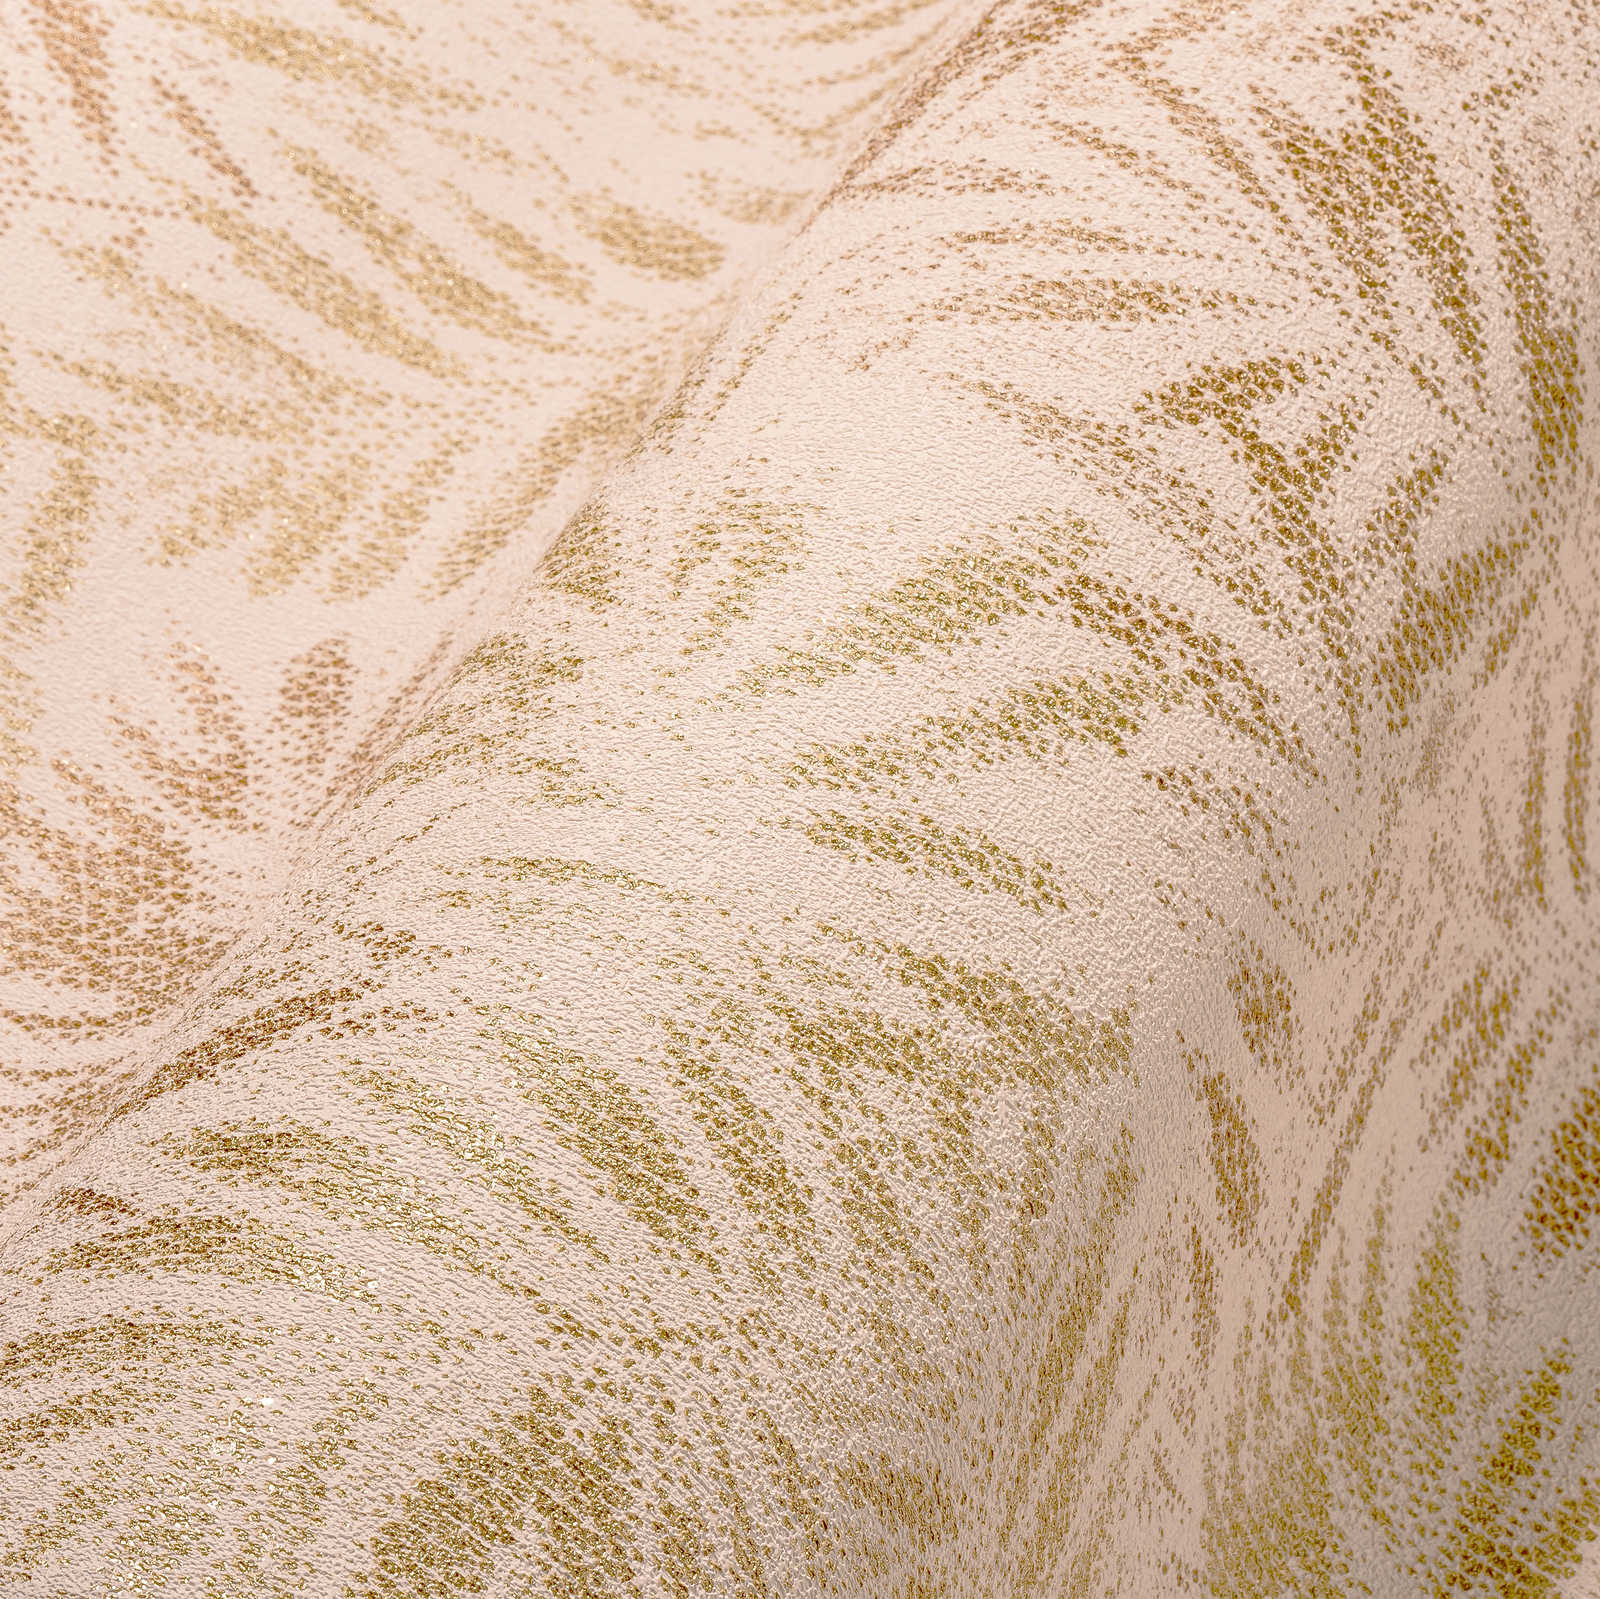             Leaf pattern non-woven wallpaper with gloss effect - pink, gold
        